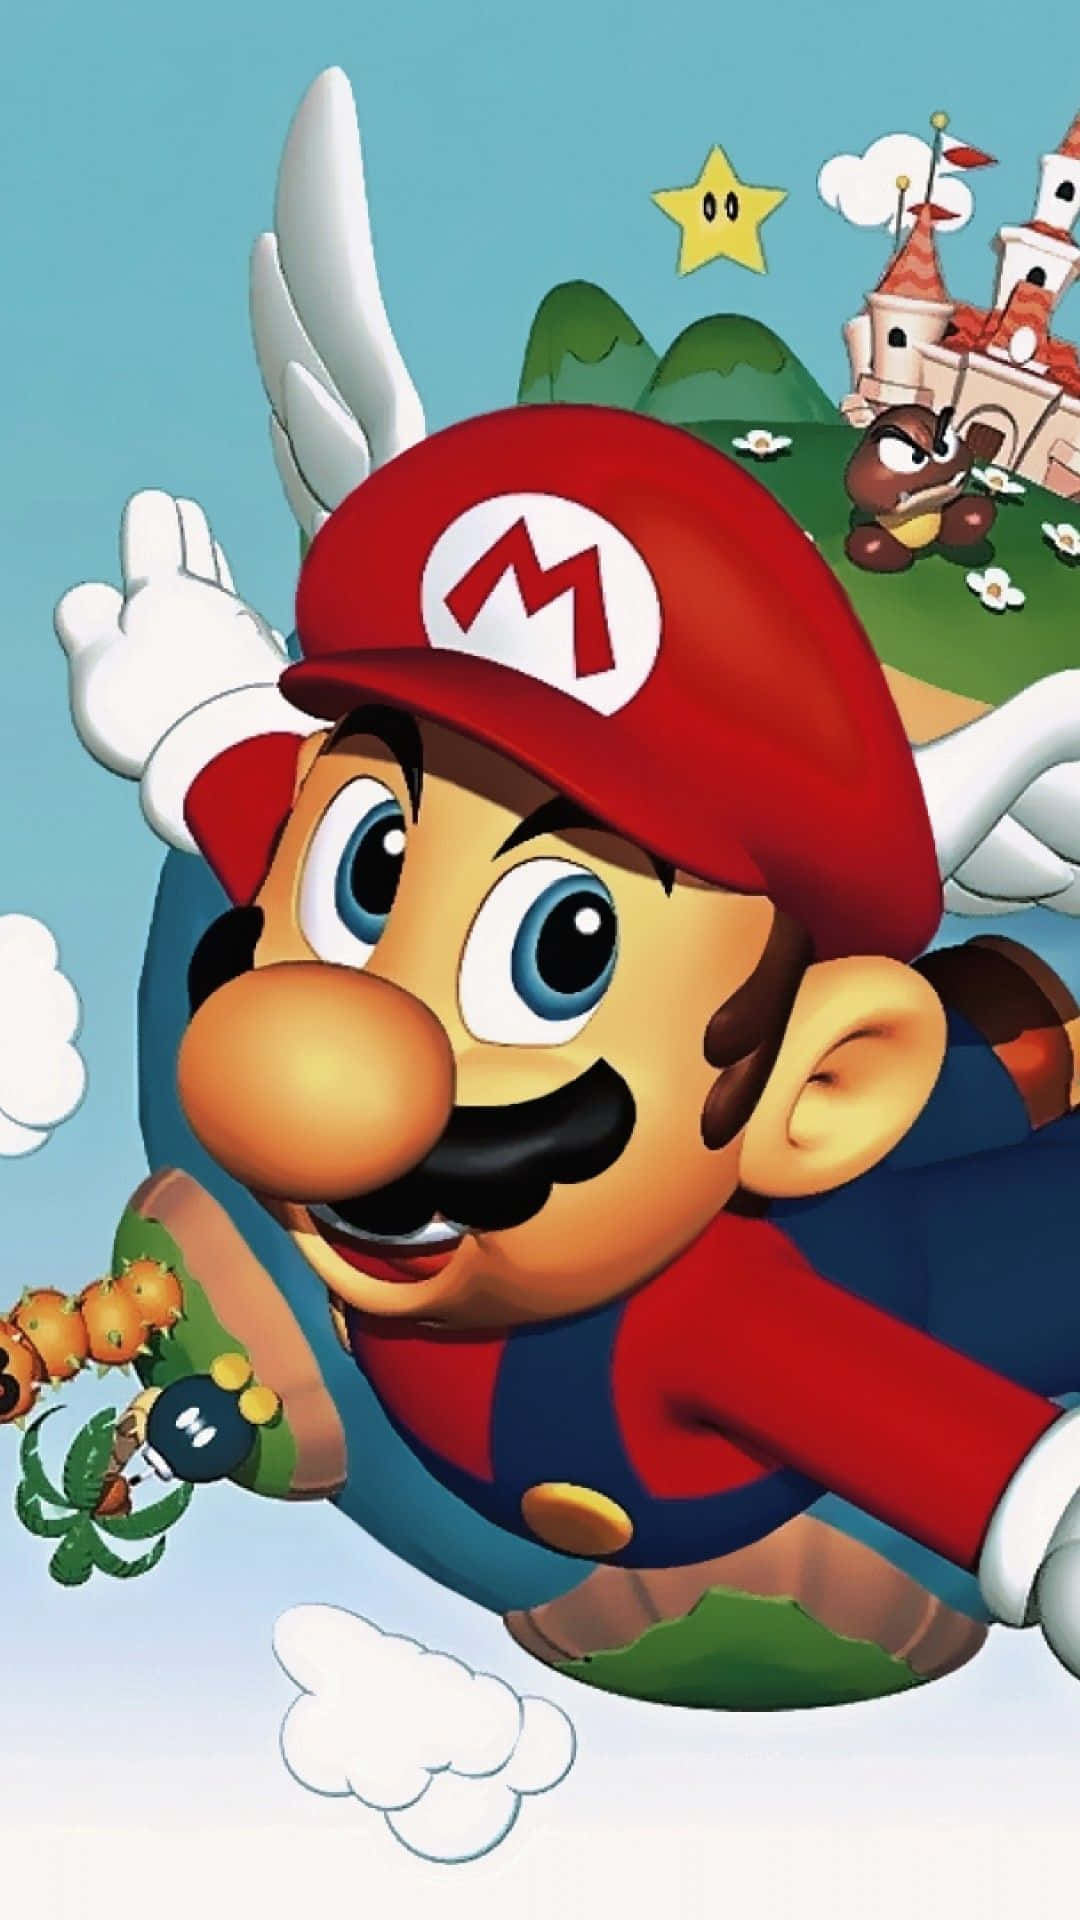 Get your hands on this incredible new Super Mario iPhone Wallpaper